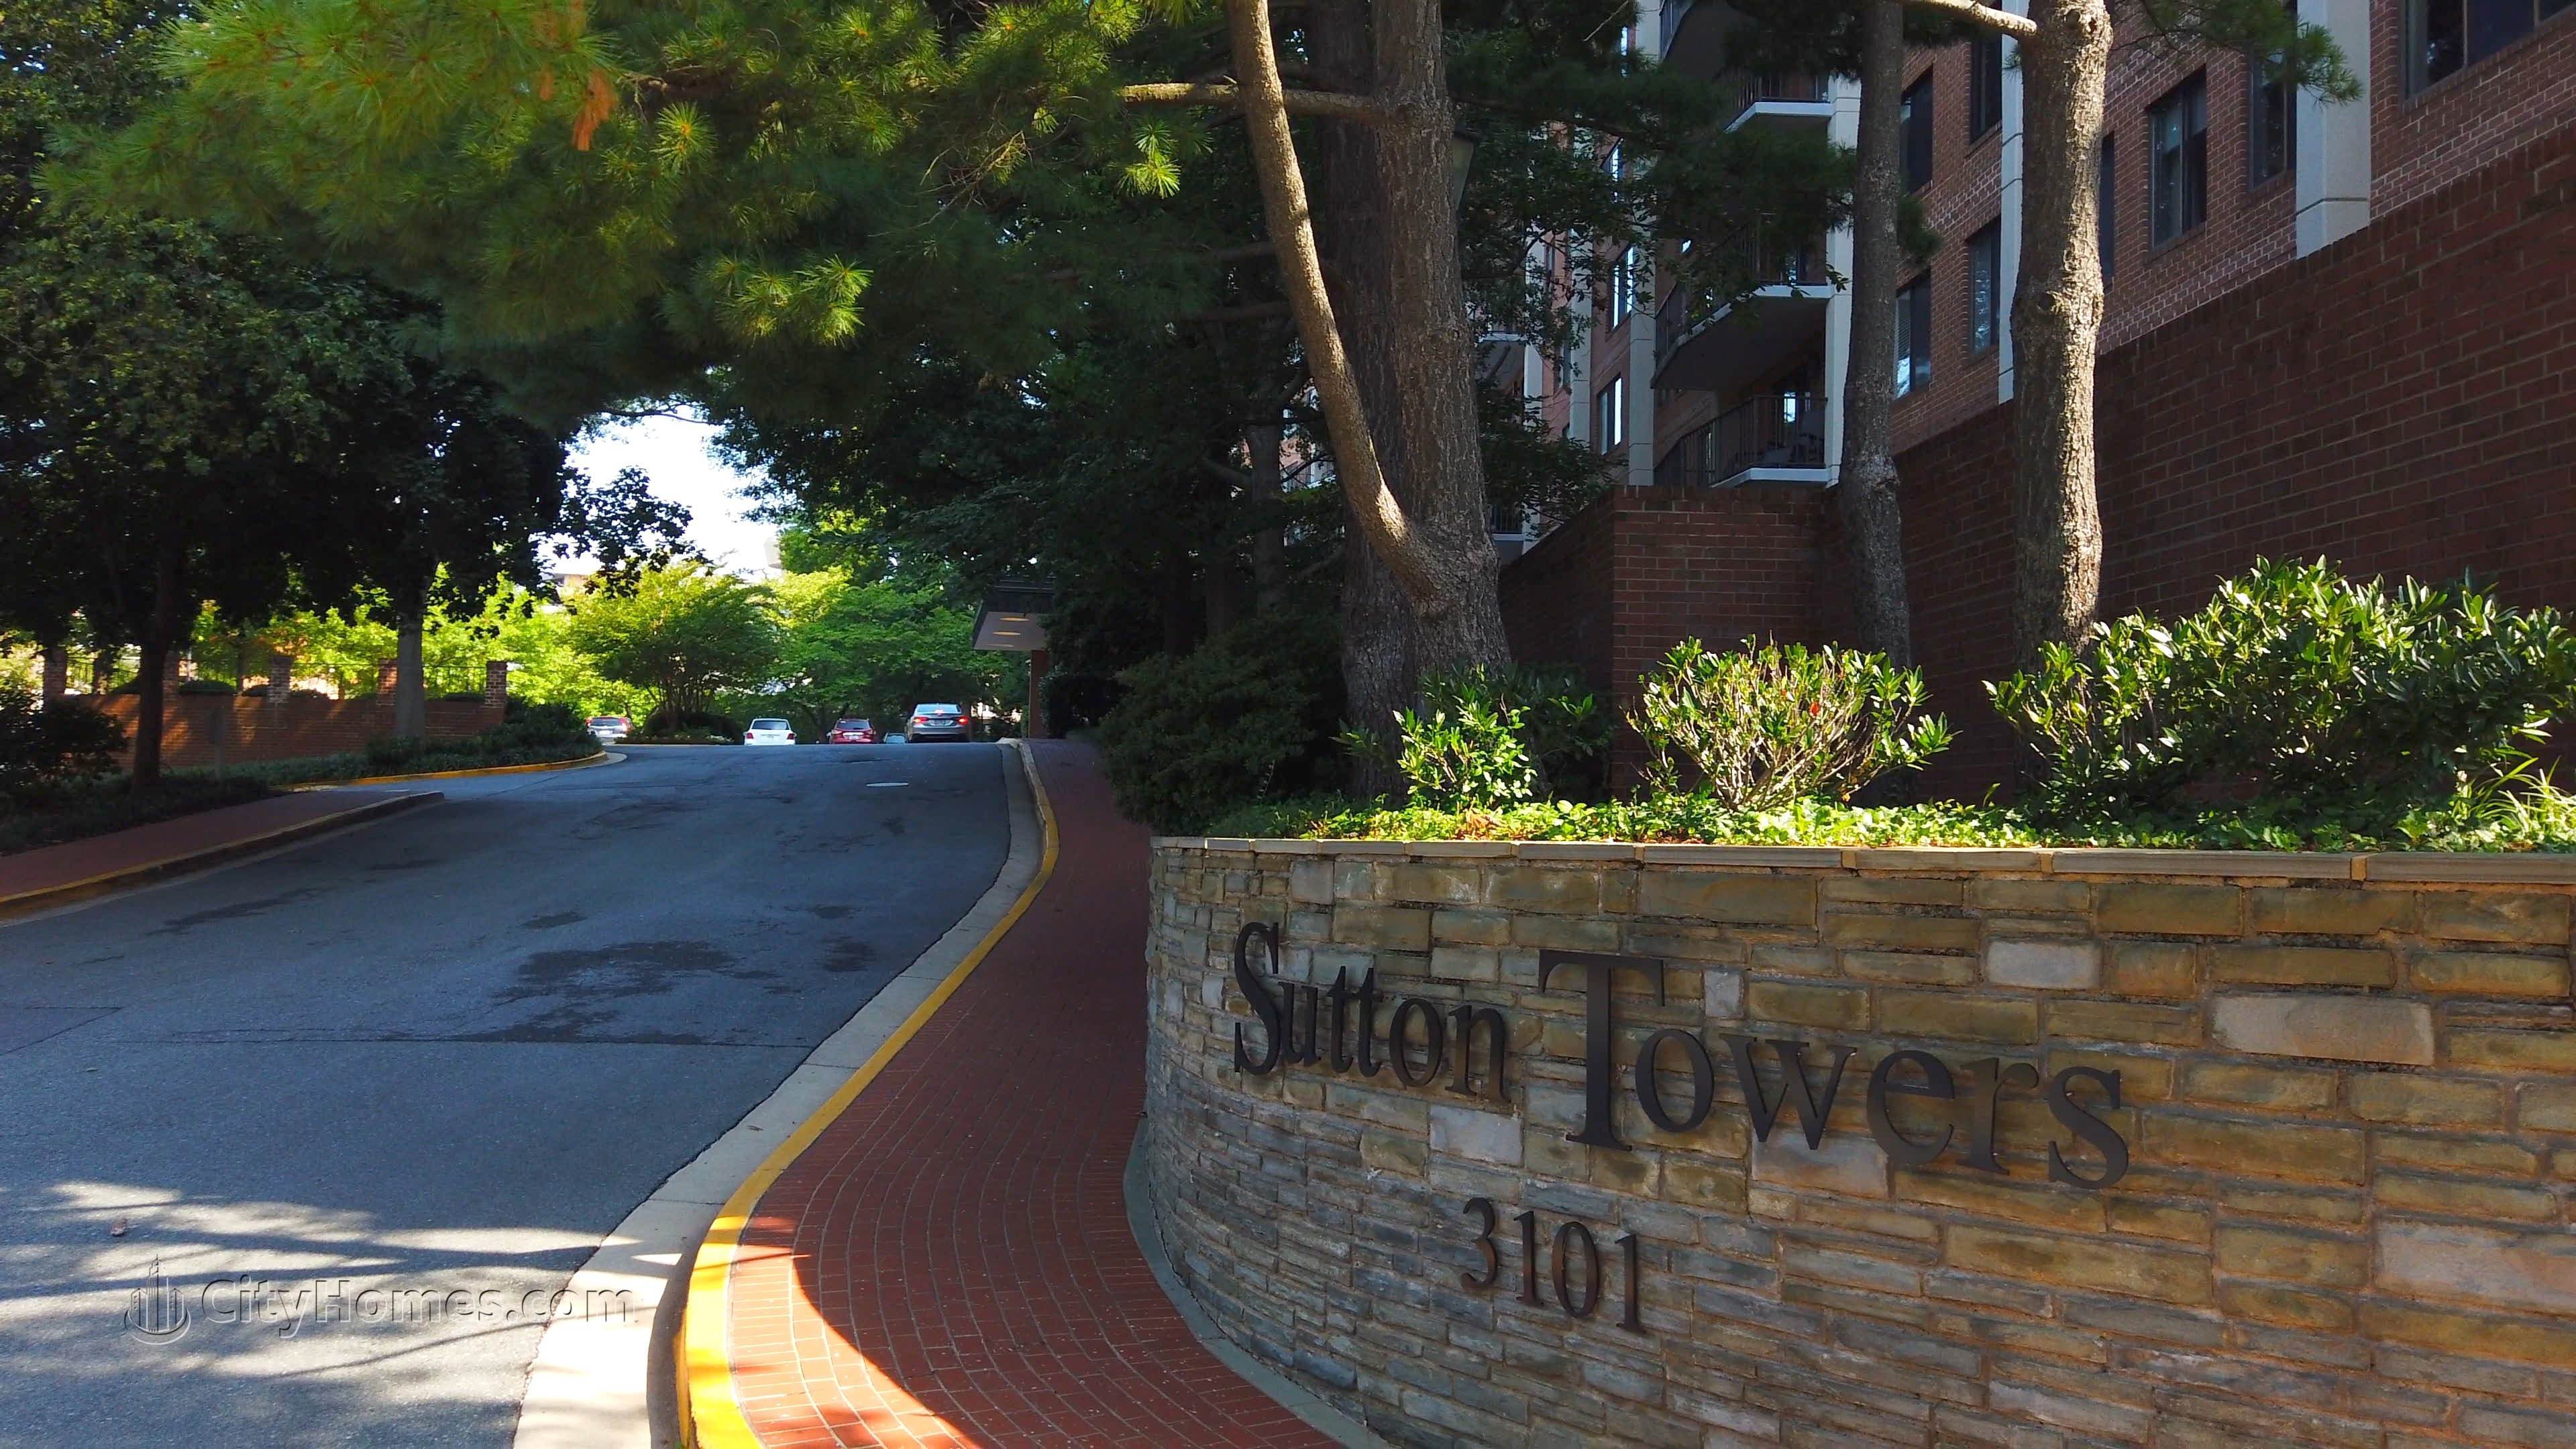 Sutton Towers gebouw op 3101 New Mexico Ave NW, Wesley Heights, Washington, DC 20016